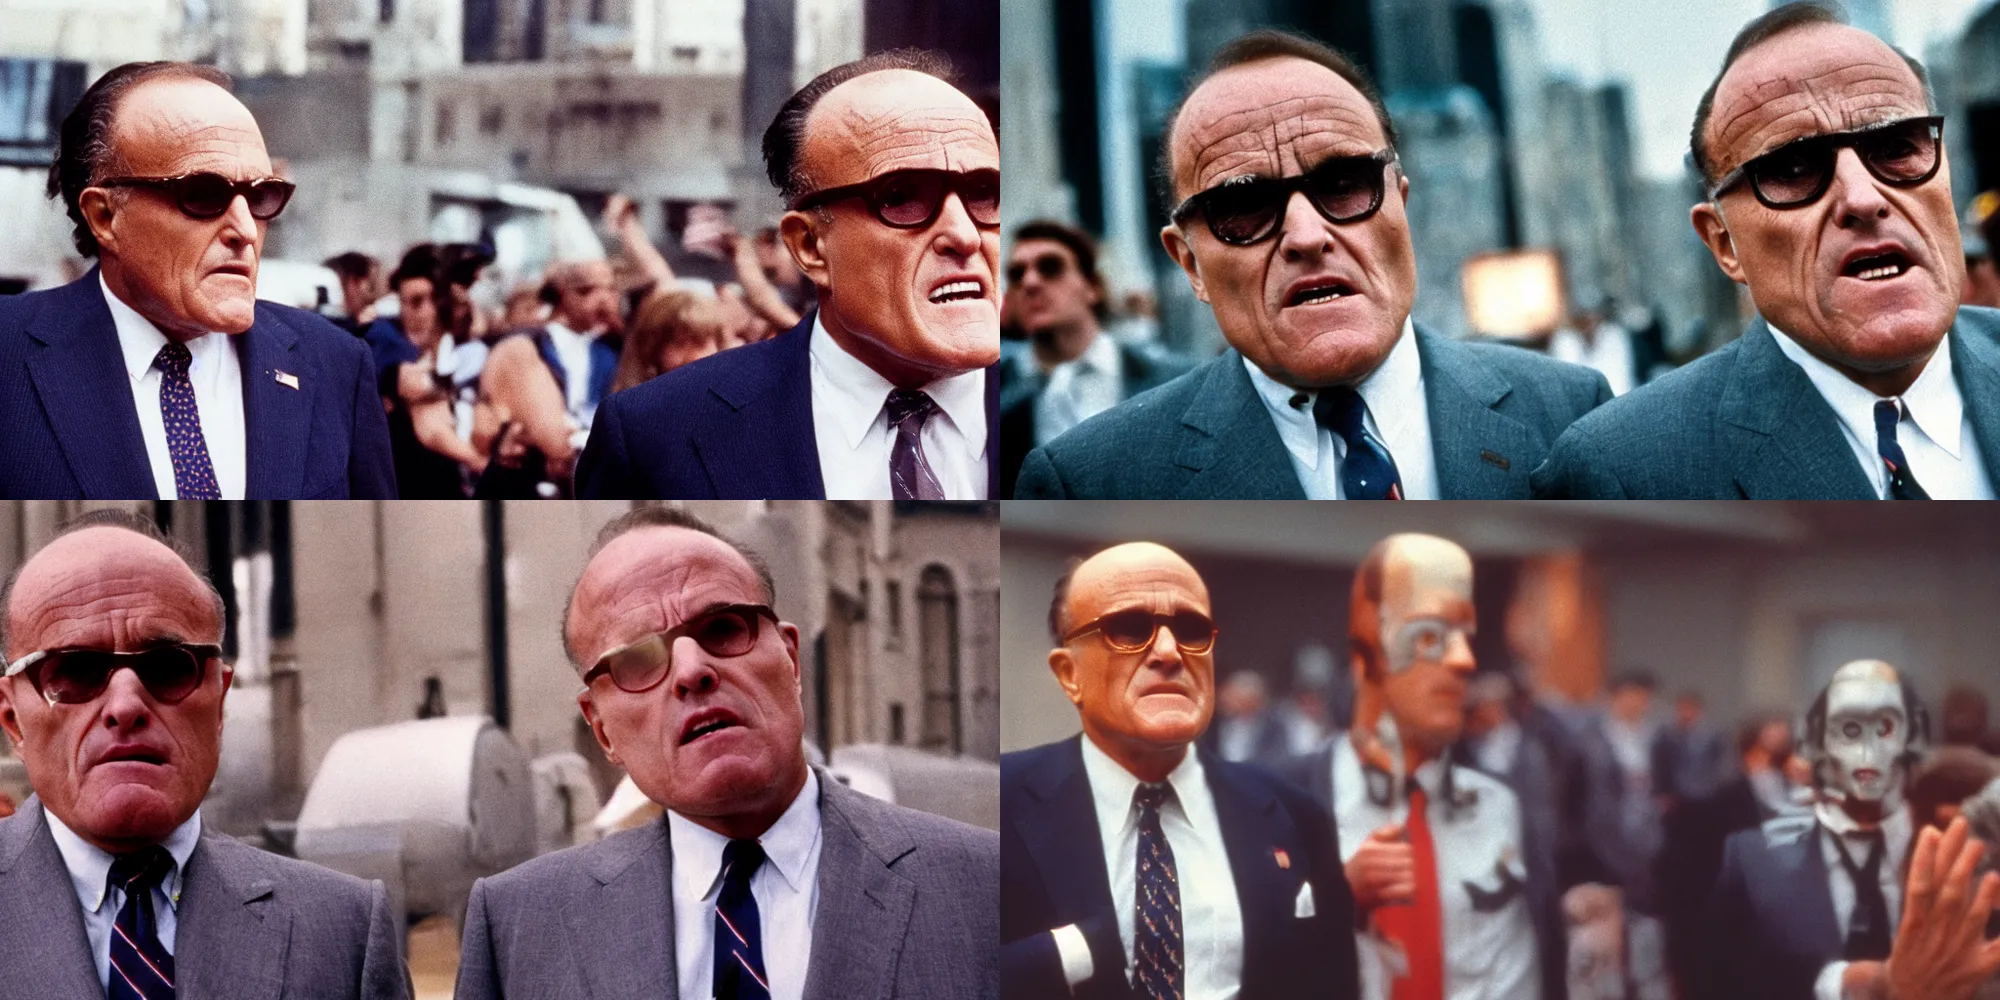 Prompt: rudy giuliani in terminator t - 9 0 0 directed by wes anderson, cinestill 8 0 0 t, 1 9 8 0 s movie still, film grain